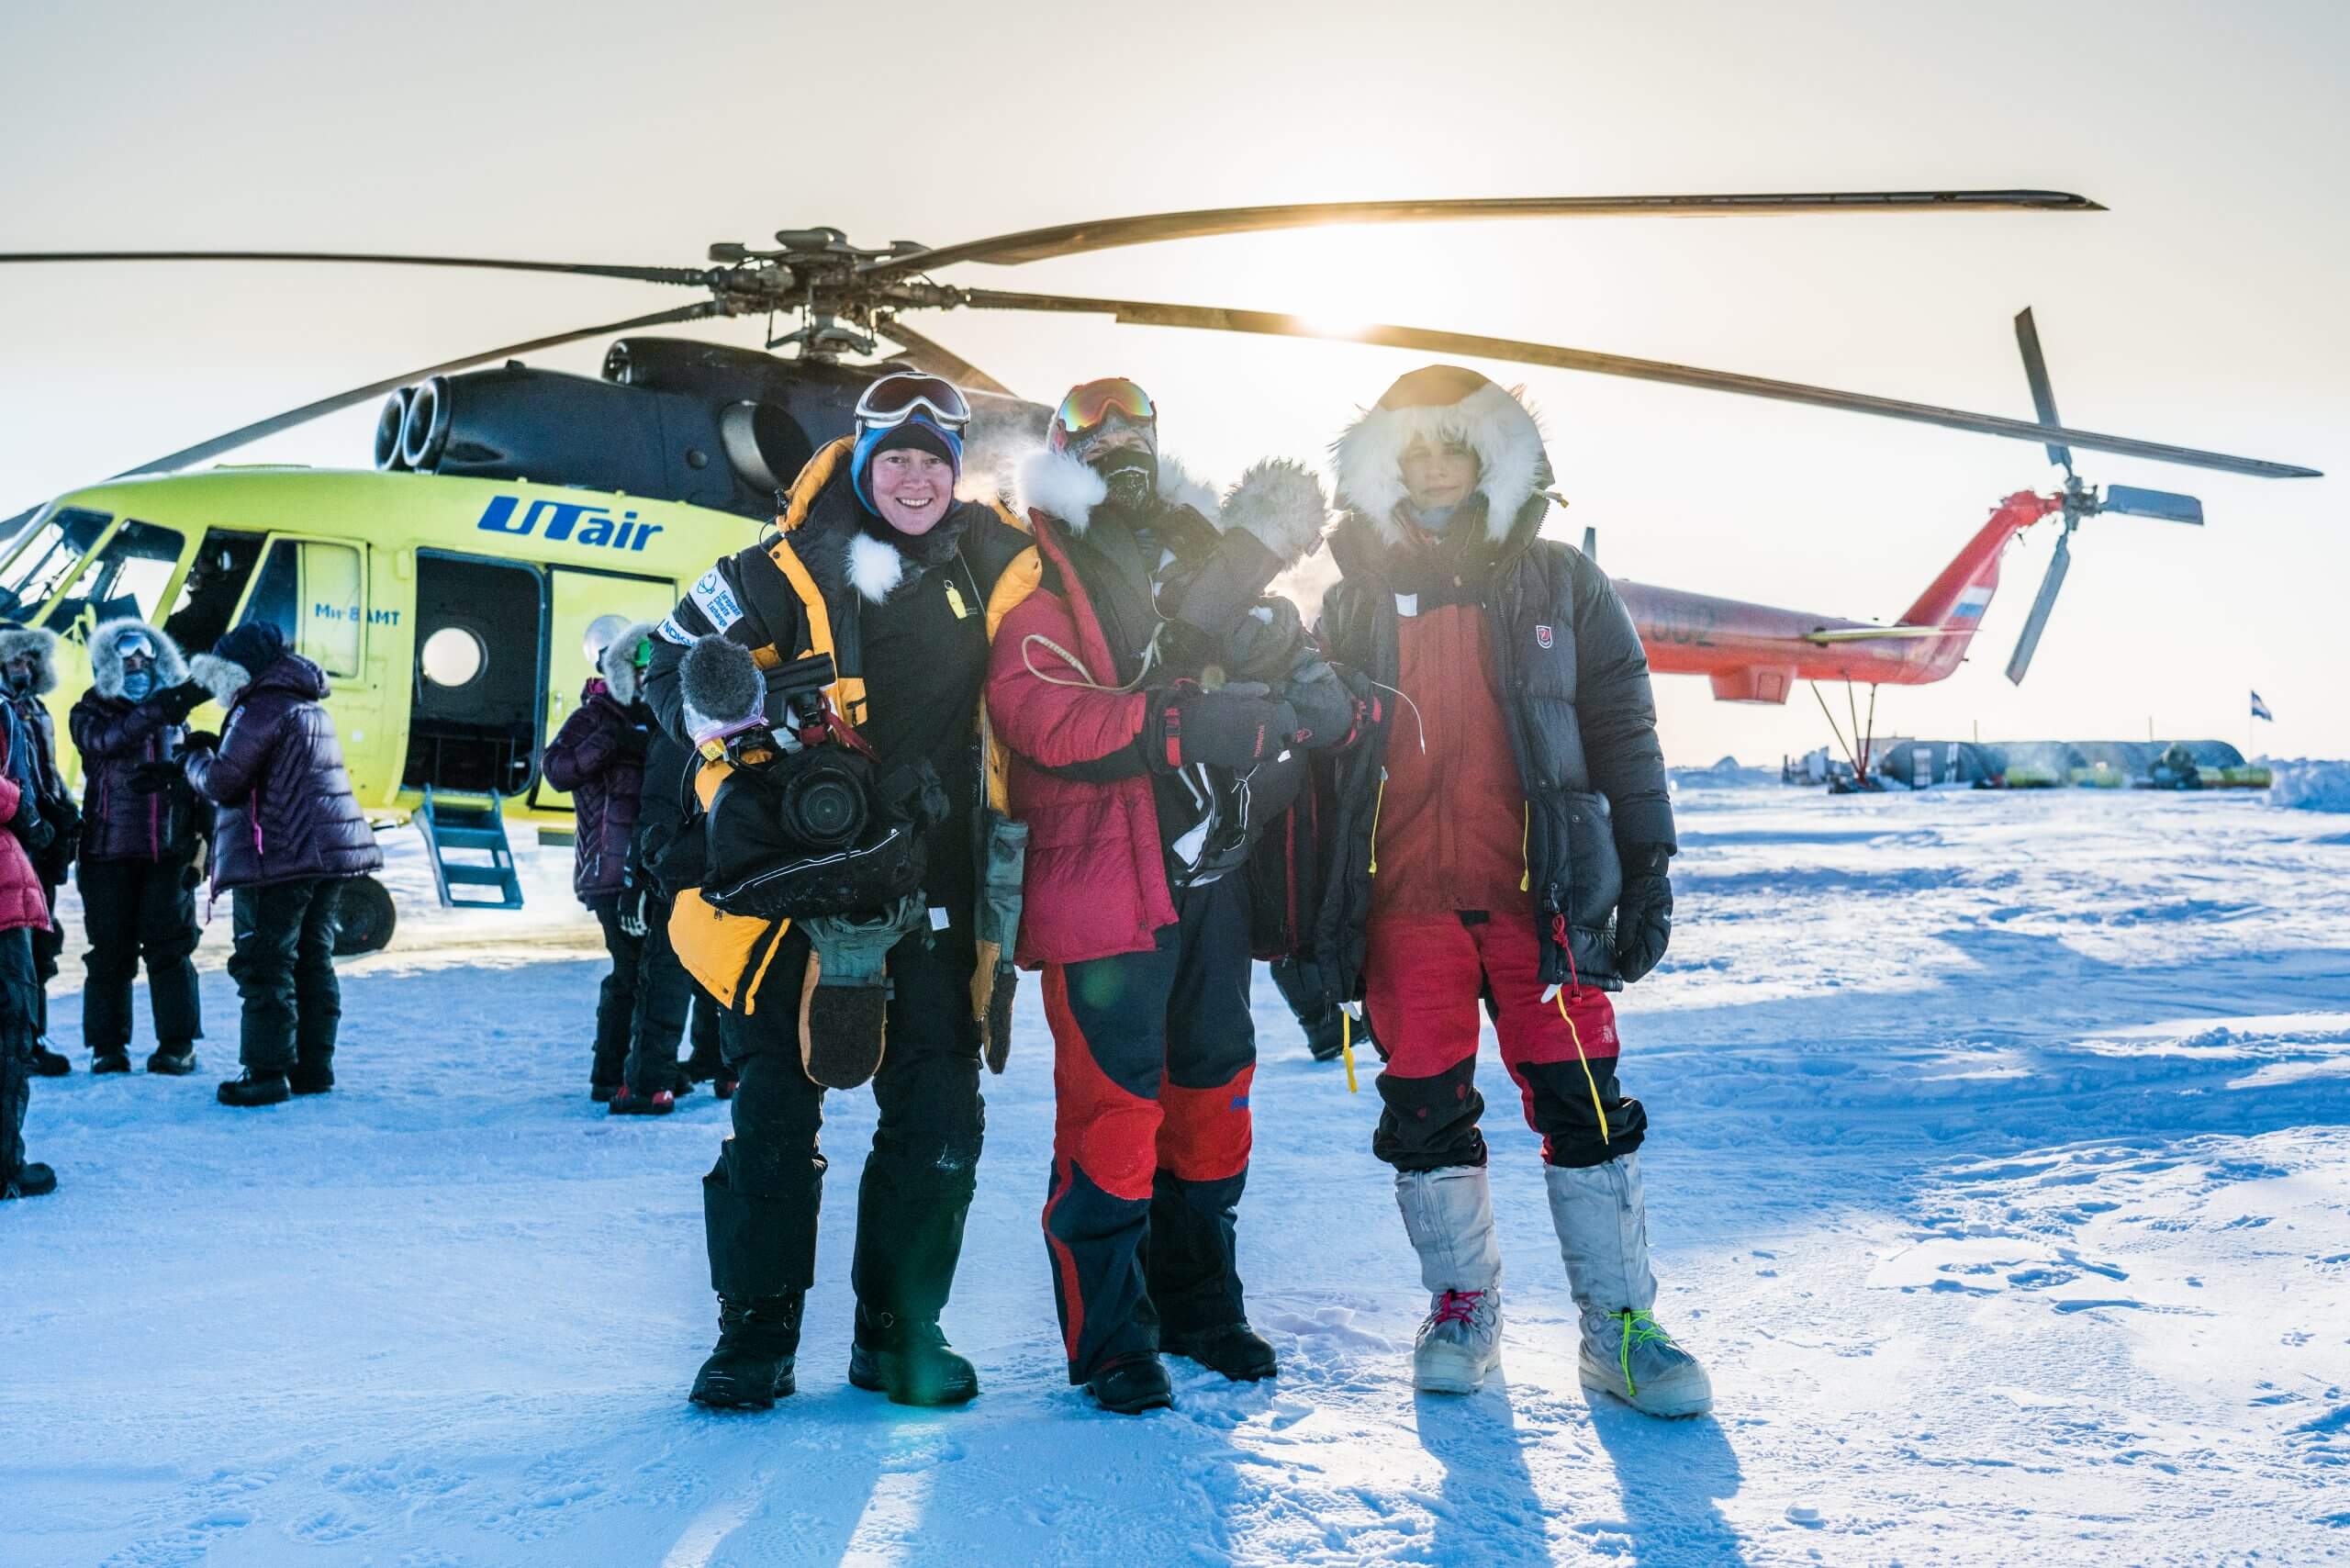 Three women in winter gear in the snow in front of a grounded helicopter, facing forward with the sun shining behind them.